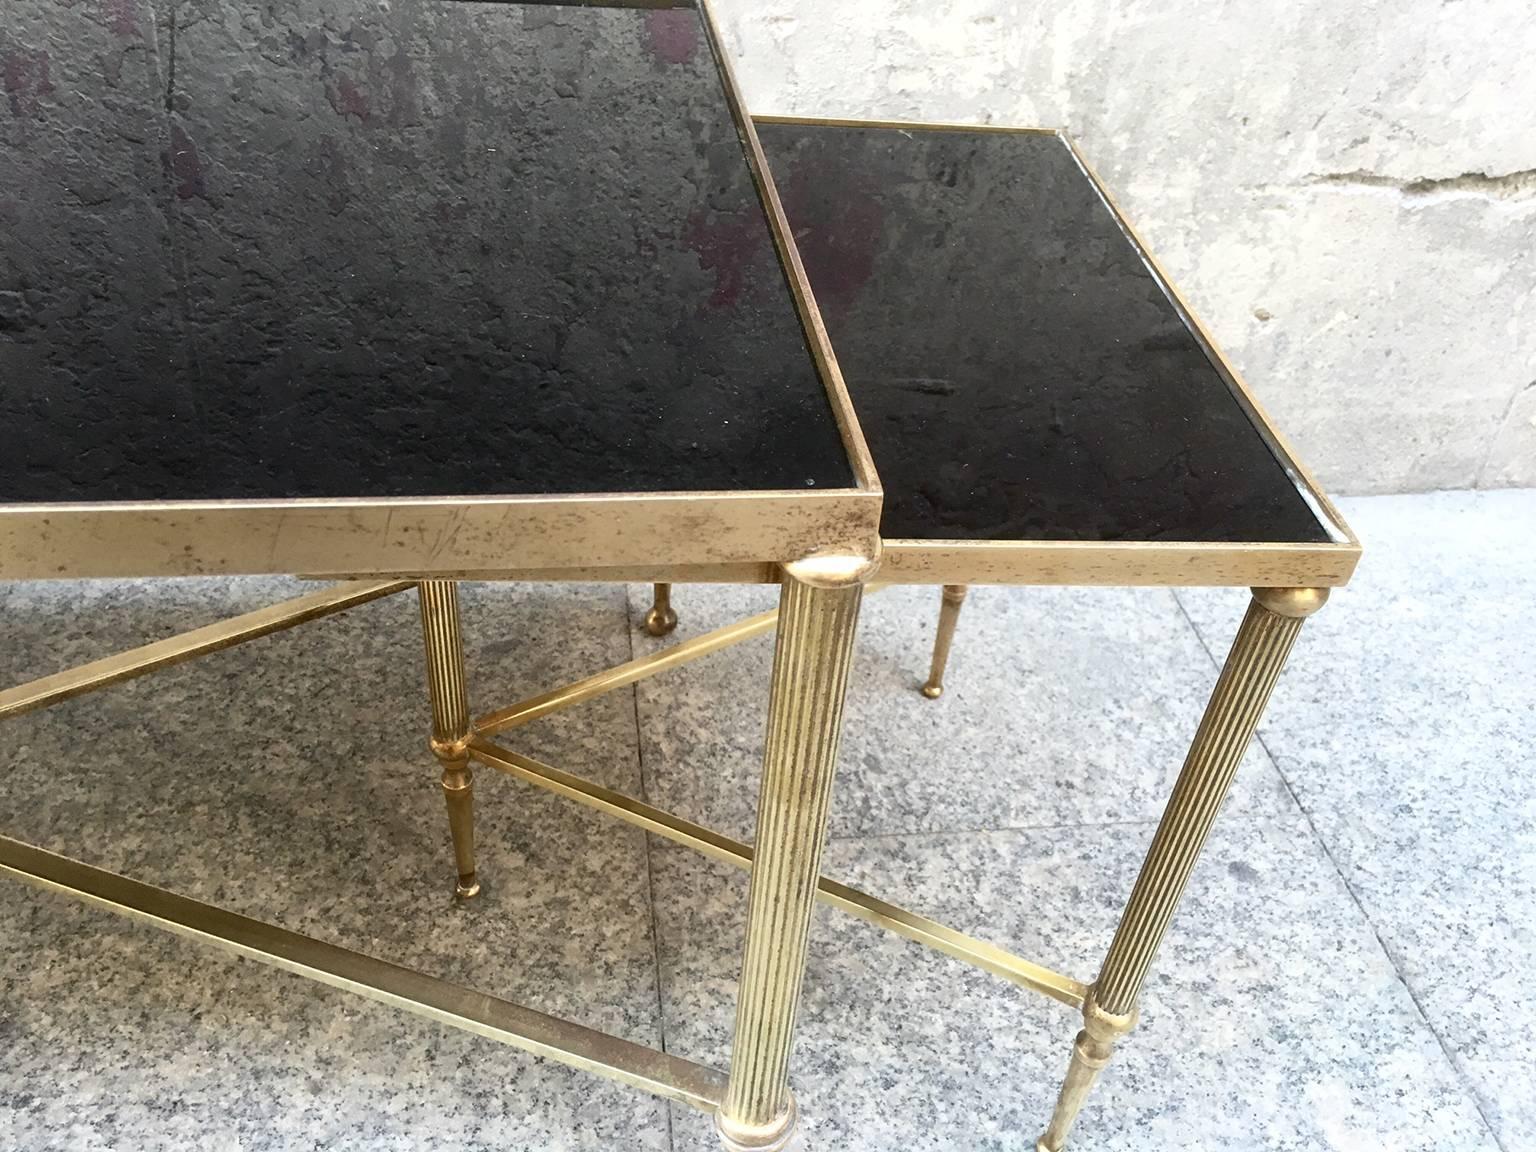 Maison Jansen neoclasical style gilt brass coktal table with two nesting tables, opaline glass top.